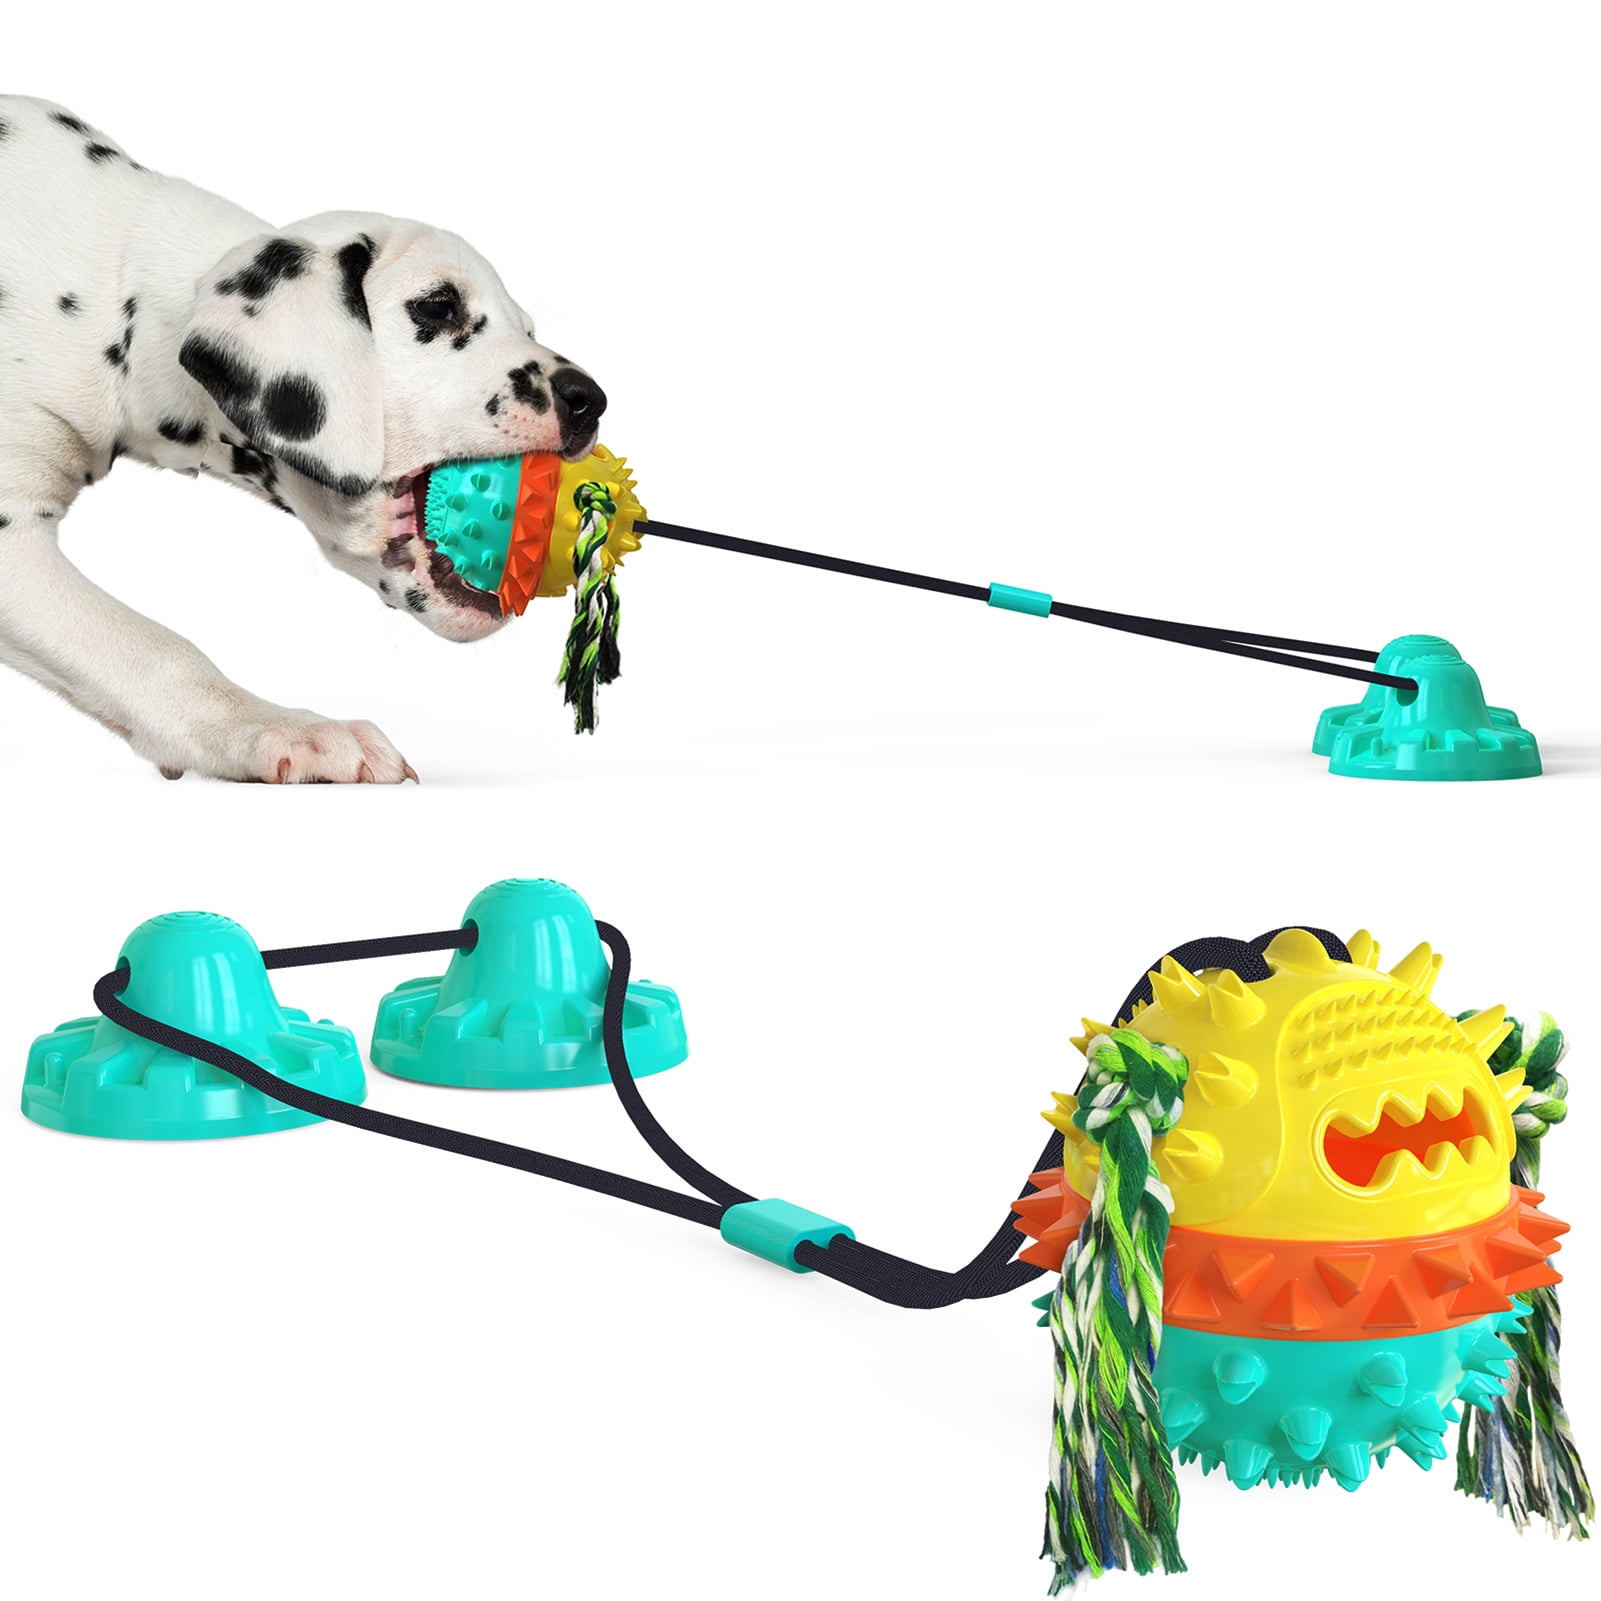 Tiozoix dog chew toys - dog toys for aggressive chewers toughest